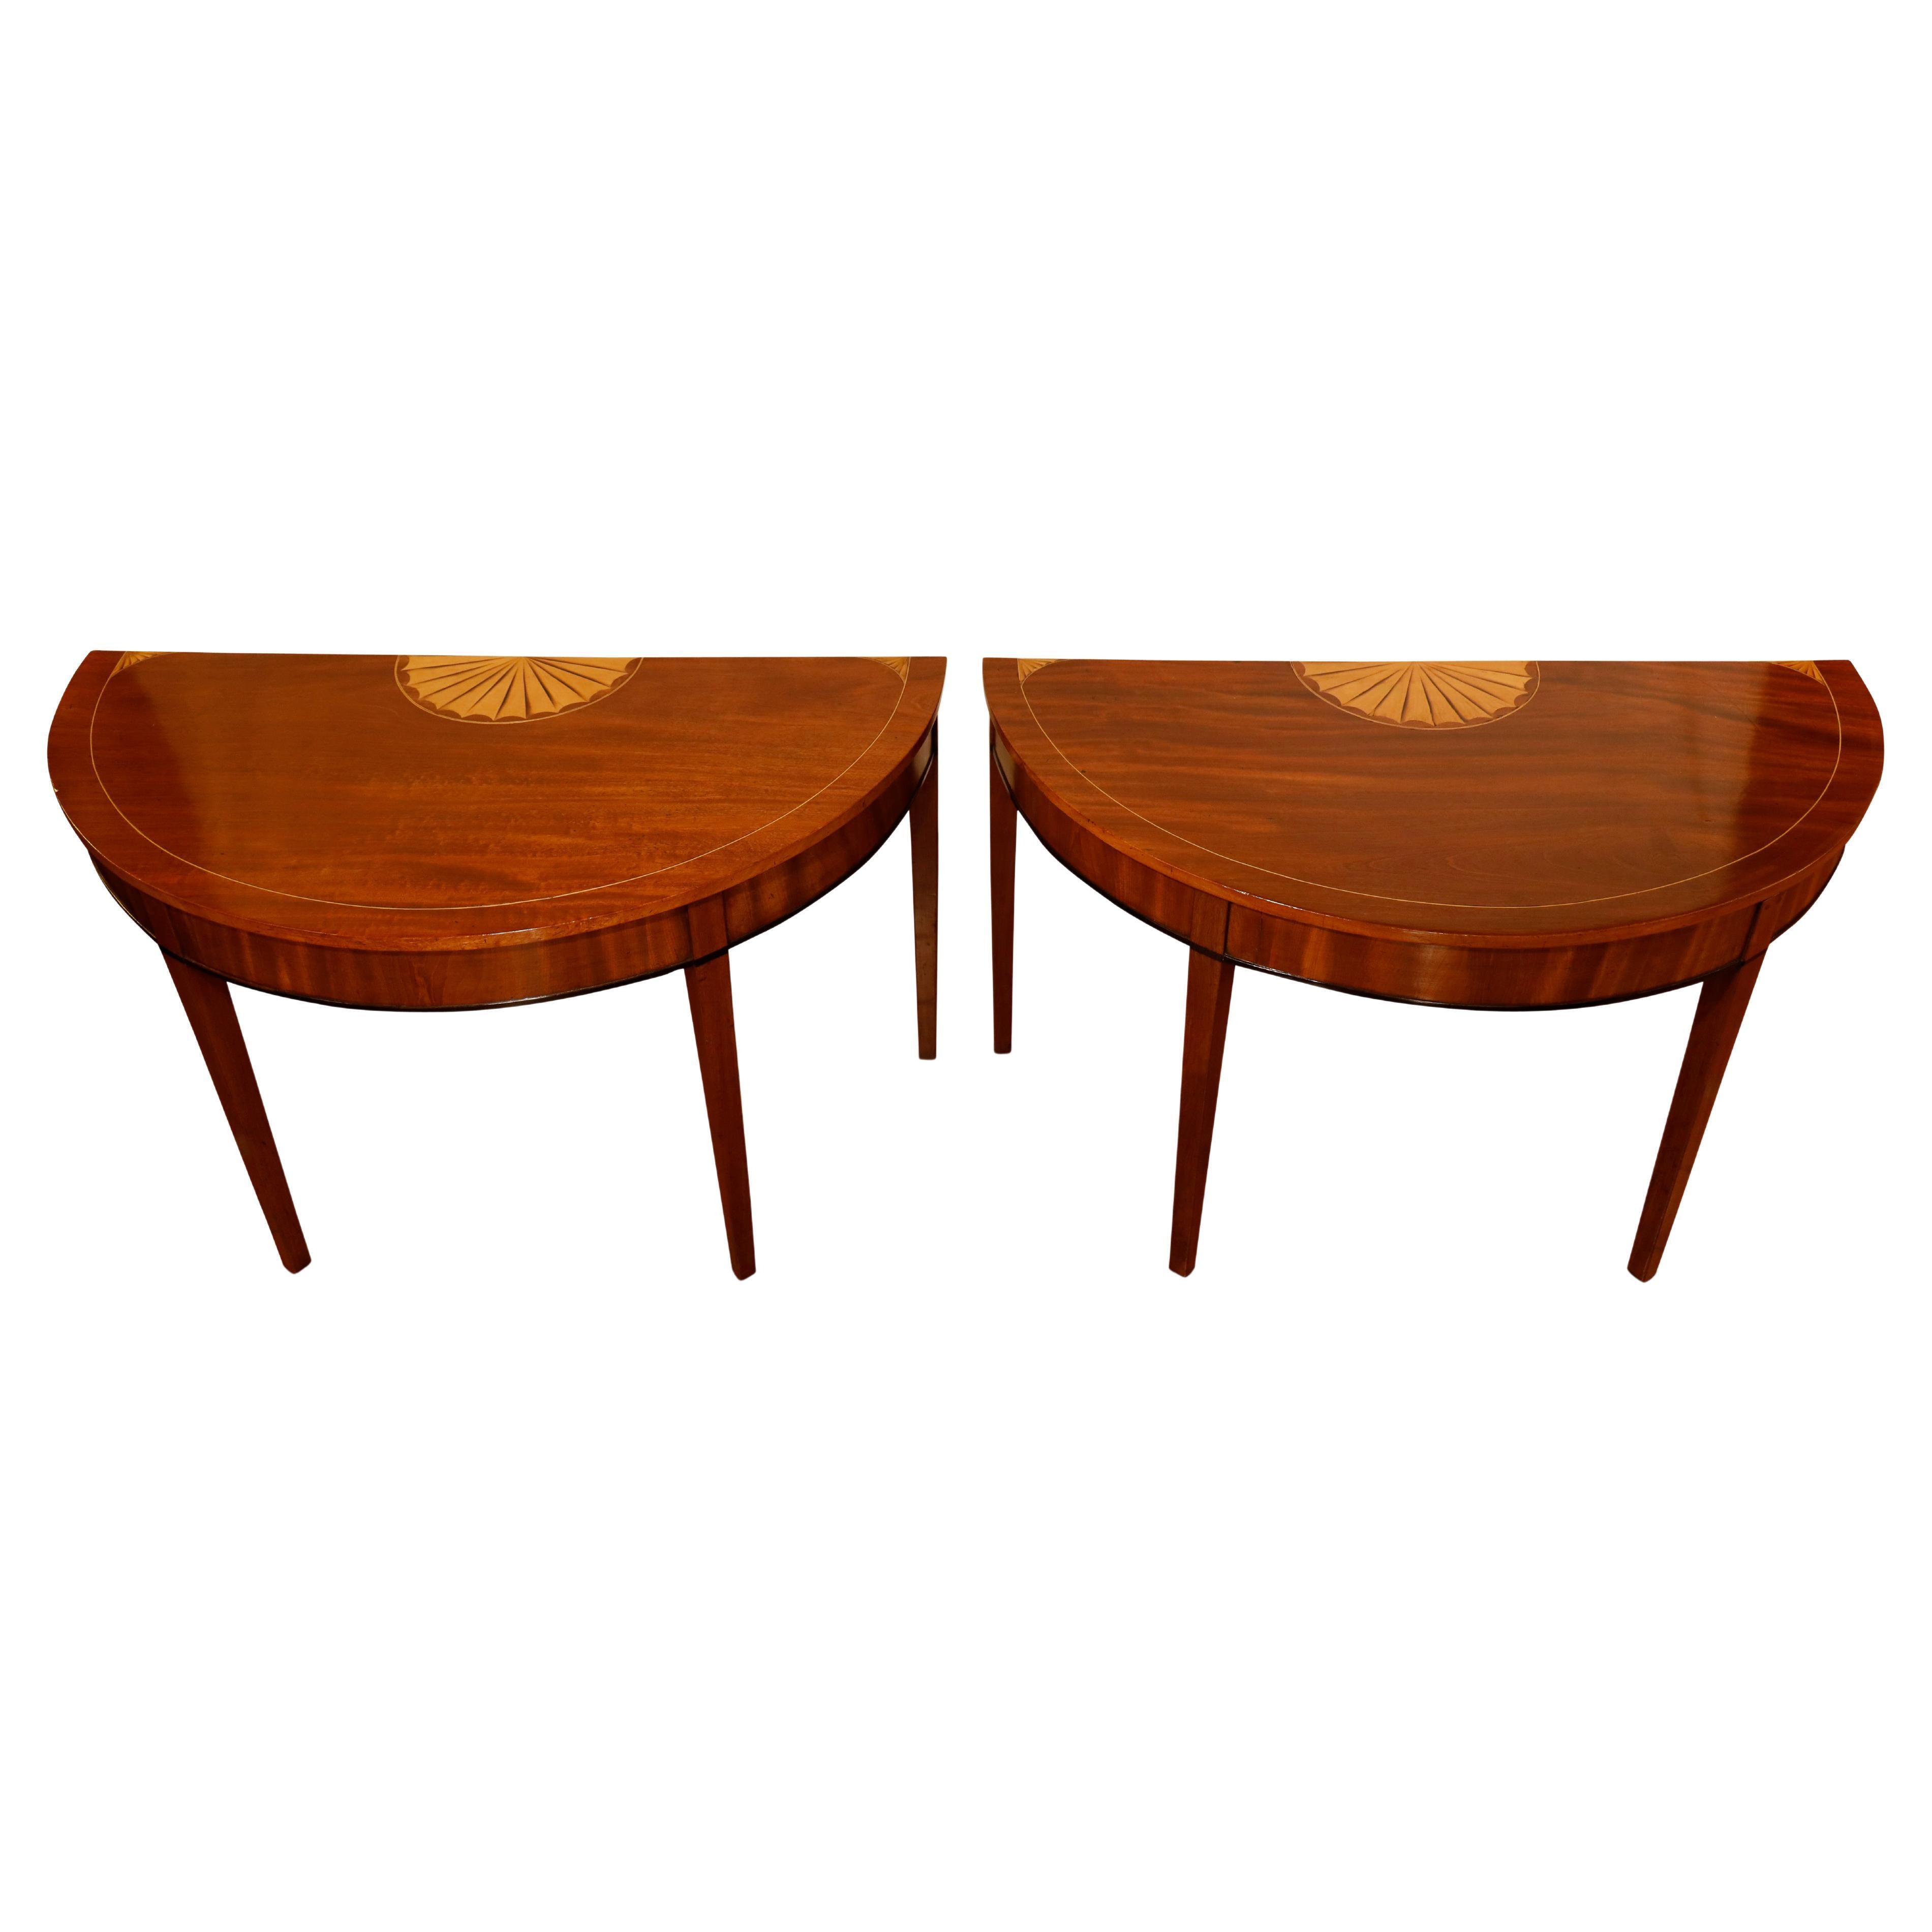 Pair of George III Demilune Tables For Sale